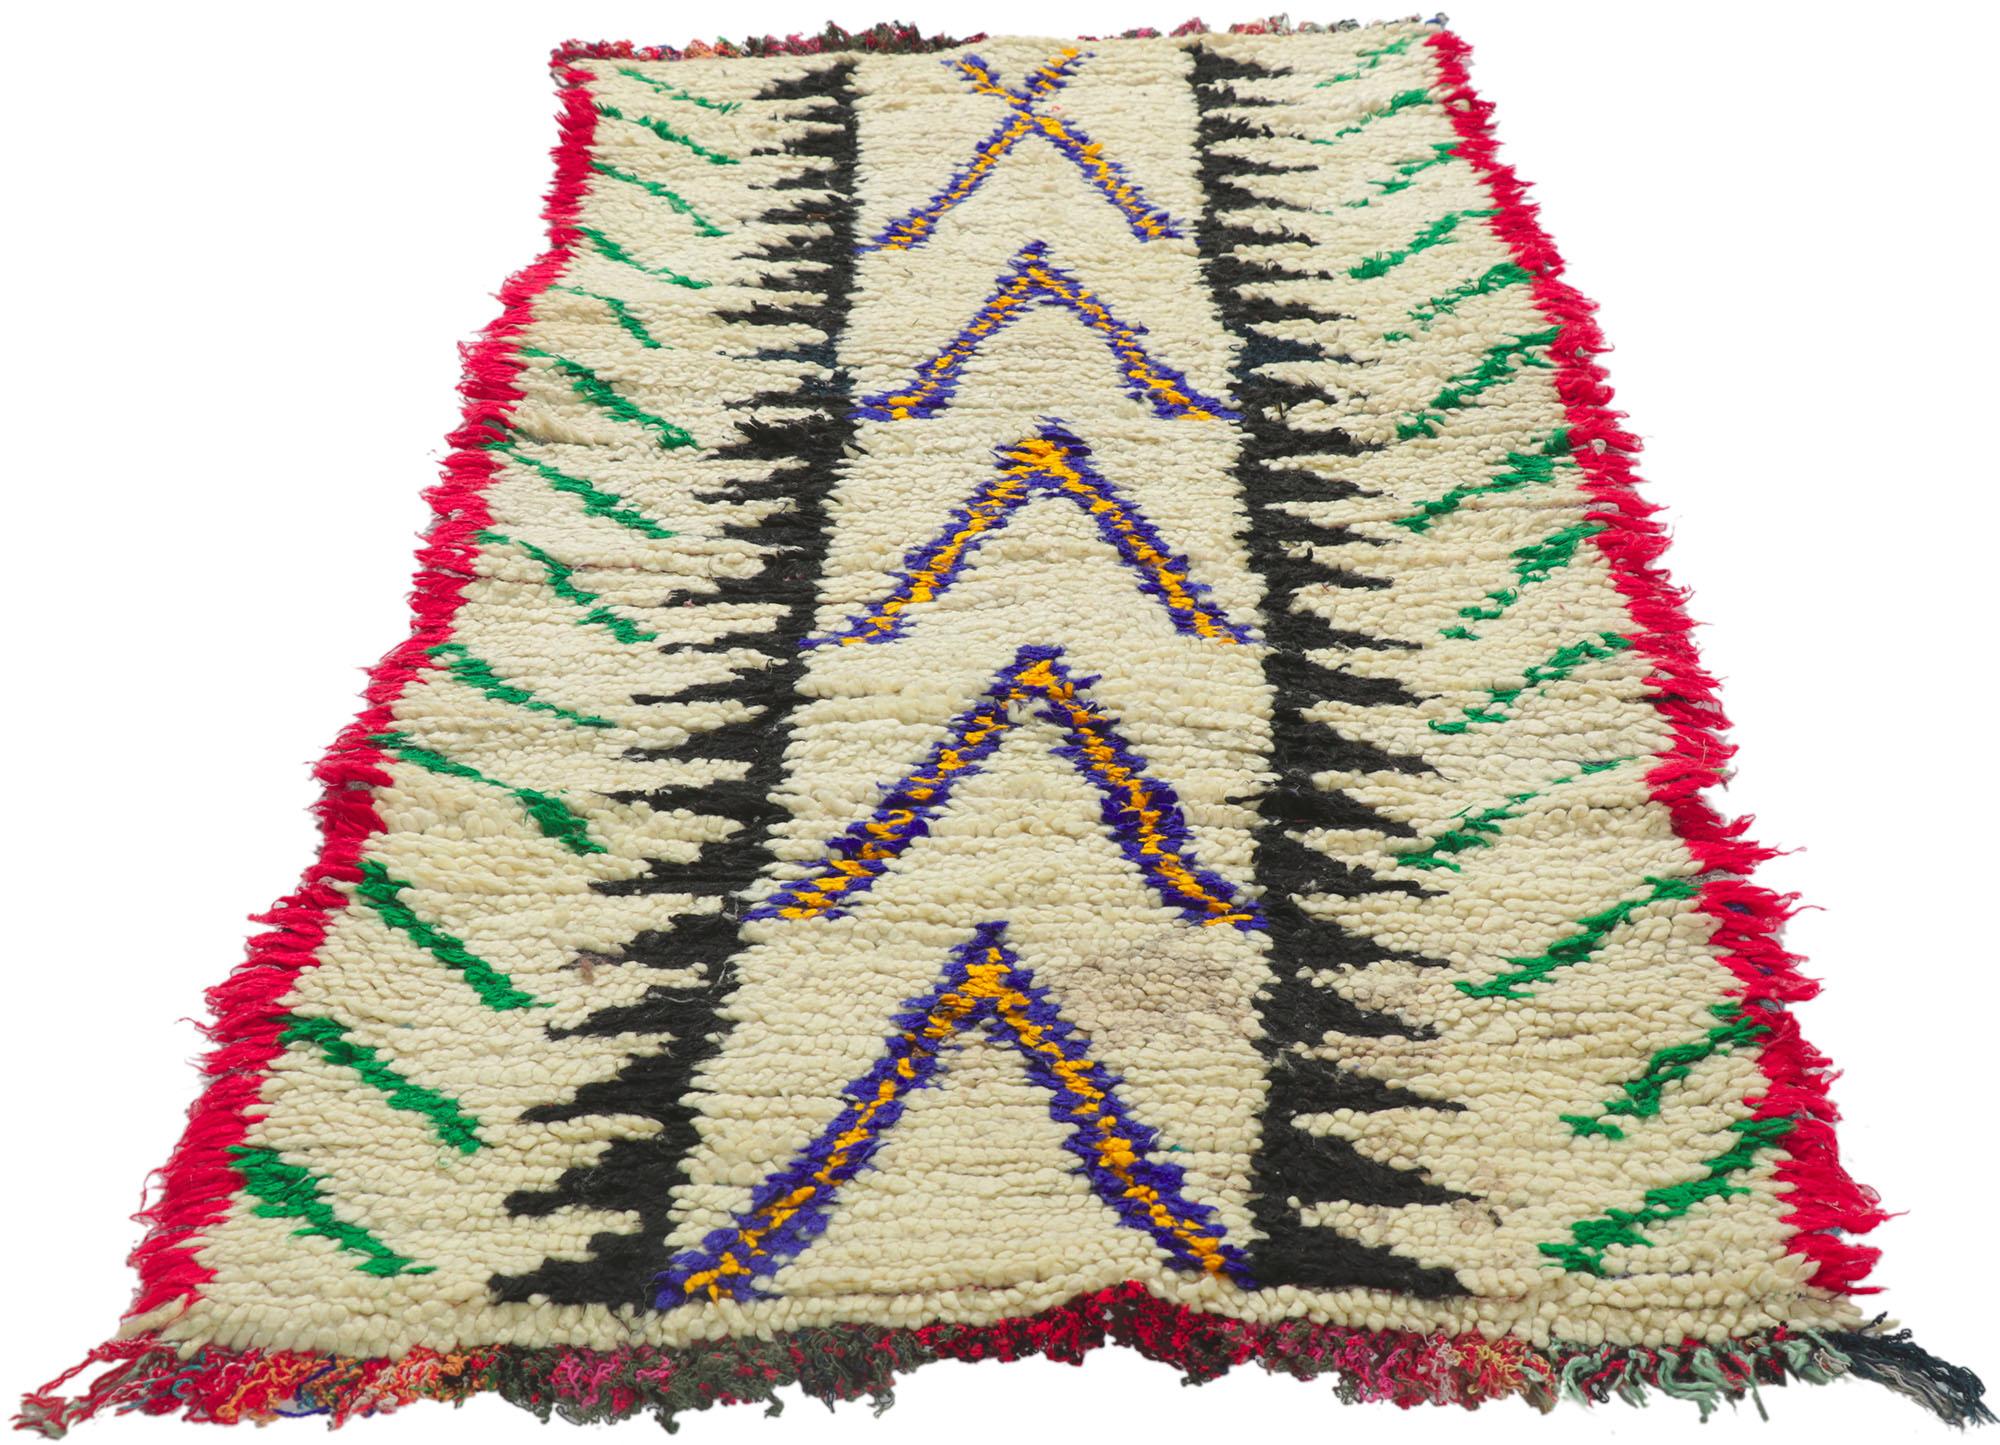 Hand-Knotted Vintage Berber Moroccan Azilal Rug, Tribal Boho Meets Vibrant Jungalow